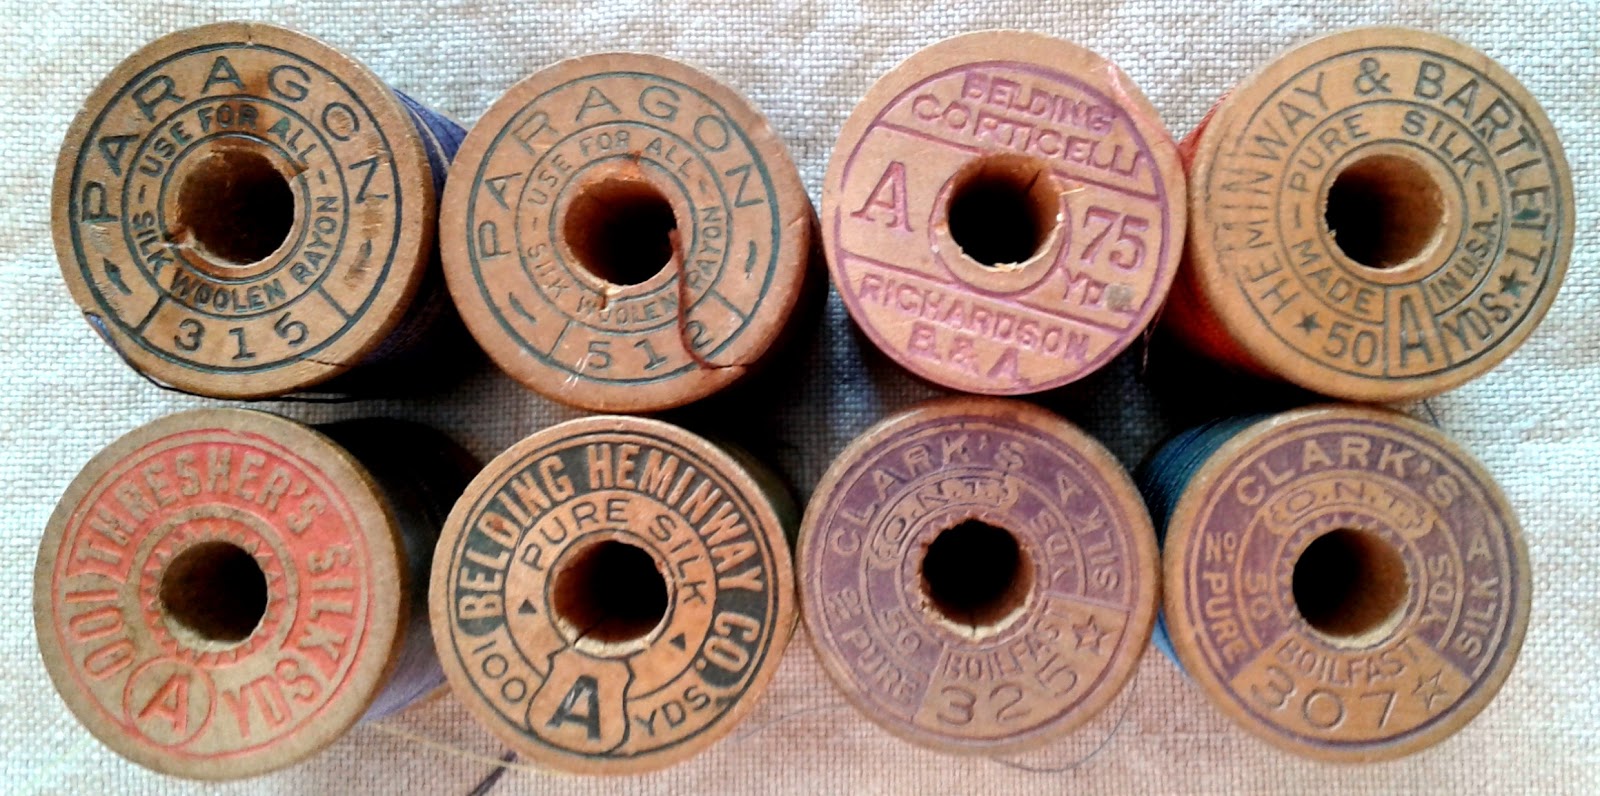 Vintage Spool Thread Photography / Sewing Notion, Wooden Spools